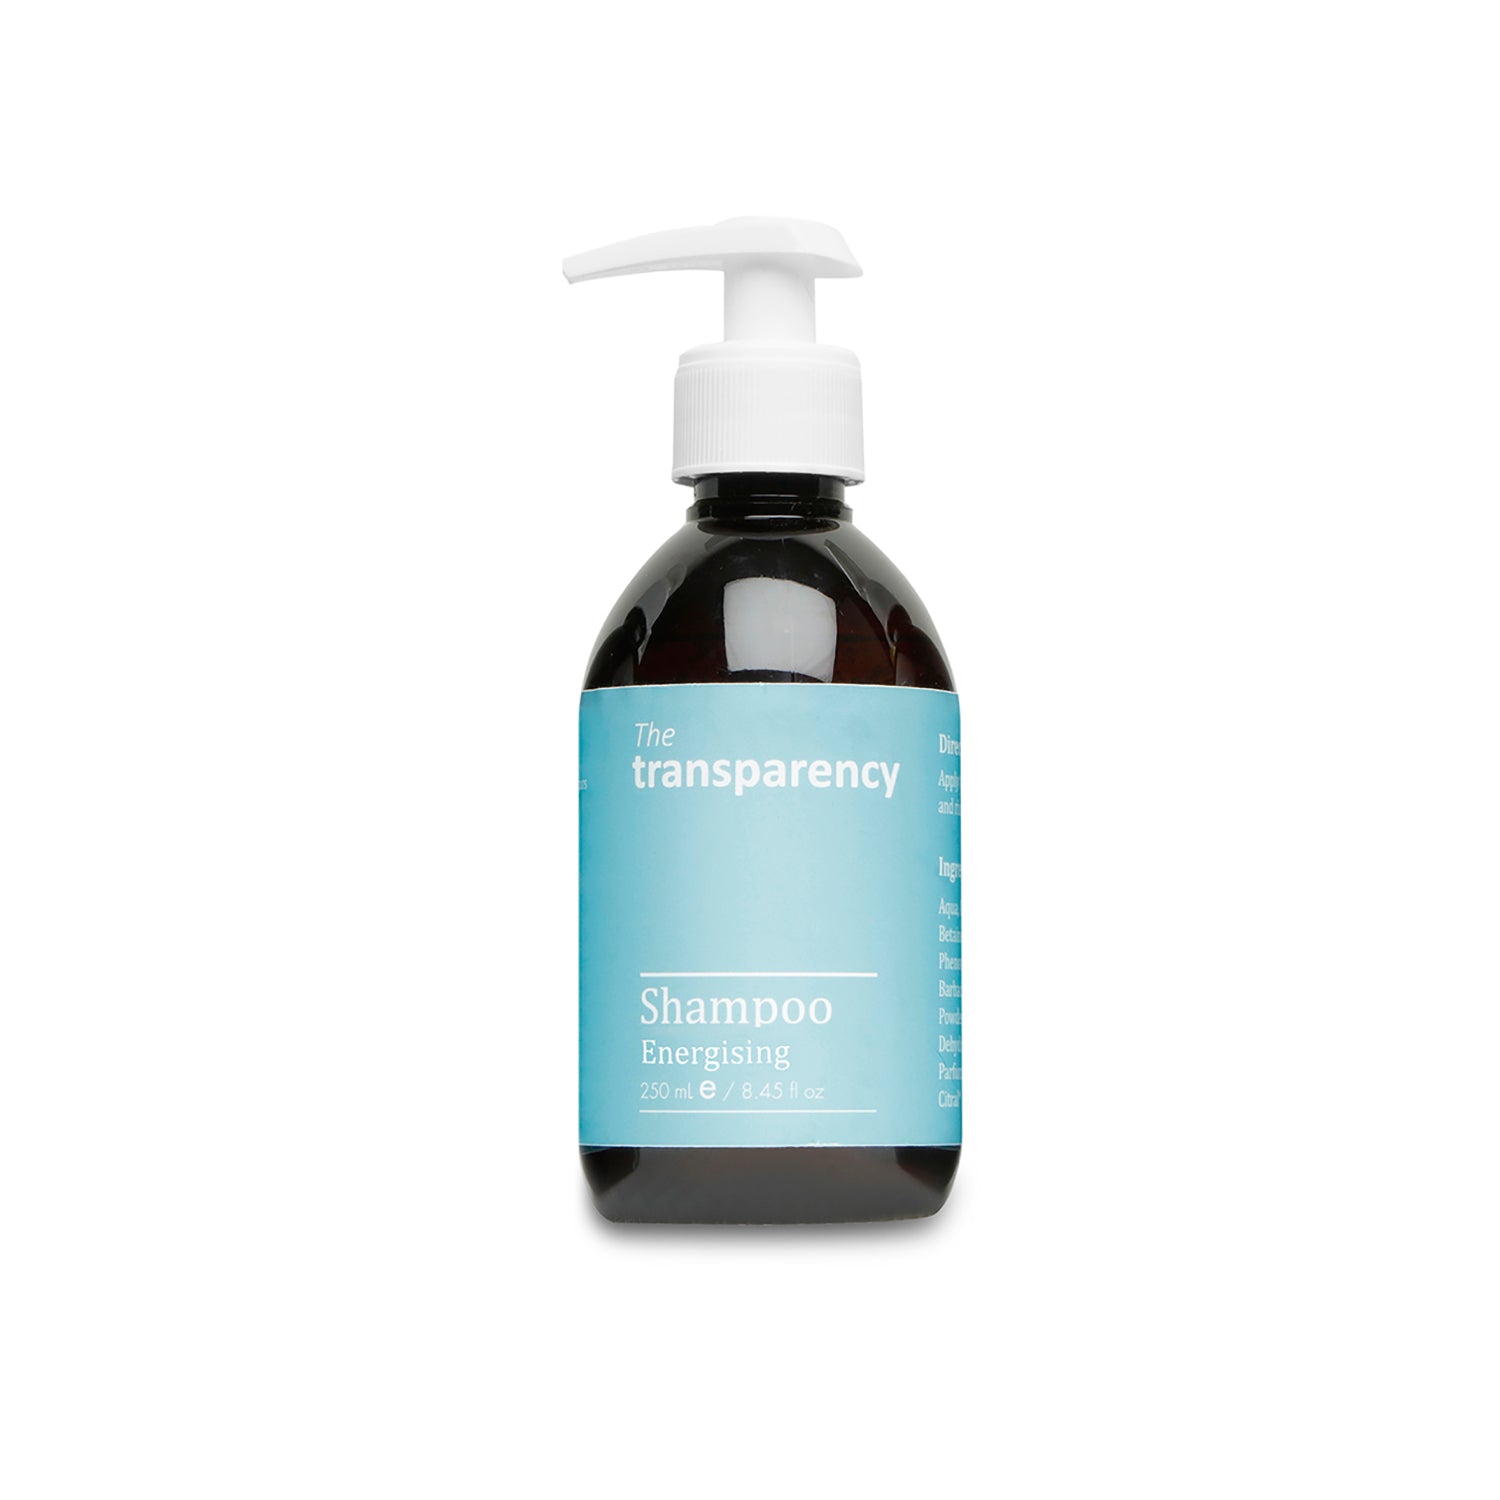 Energising Hair Shampoo - The Transparency